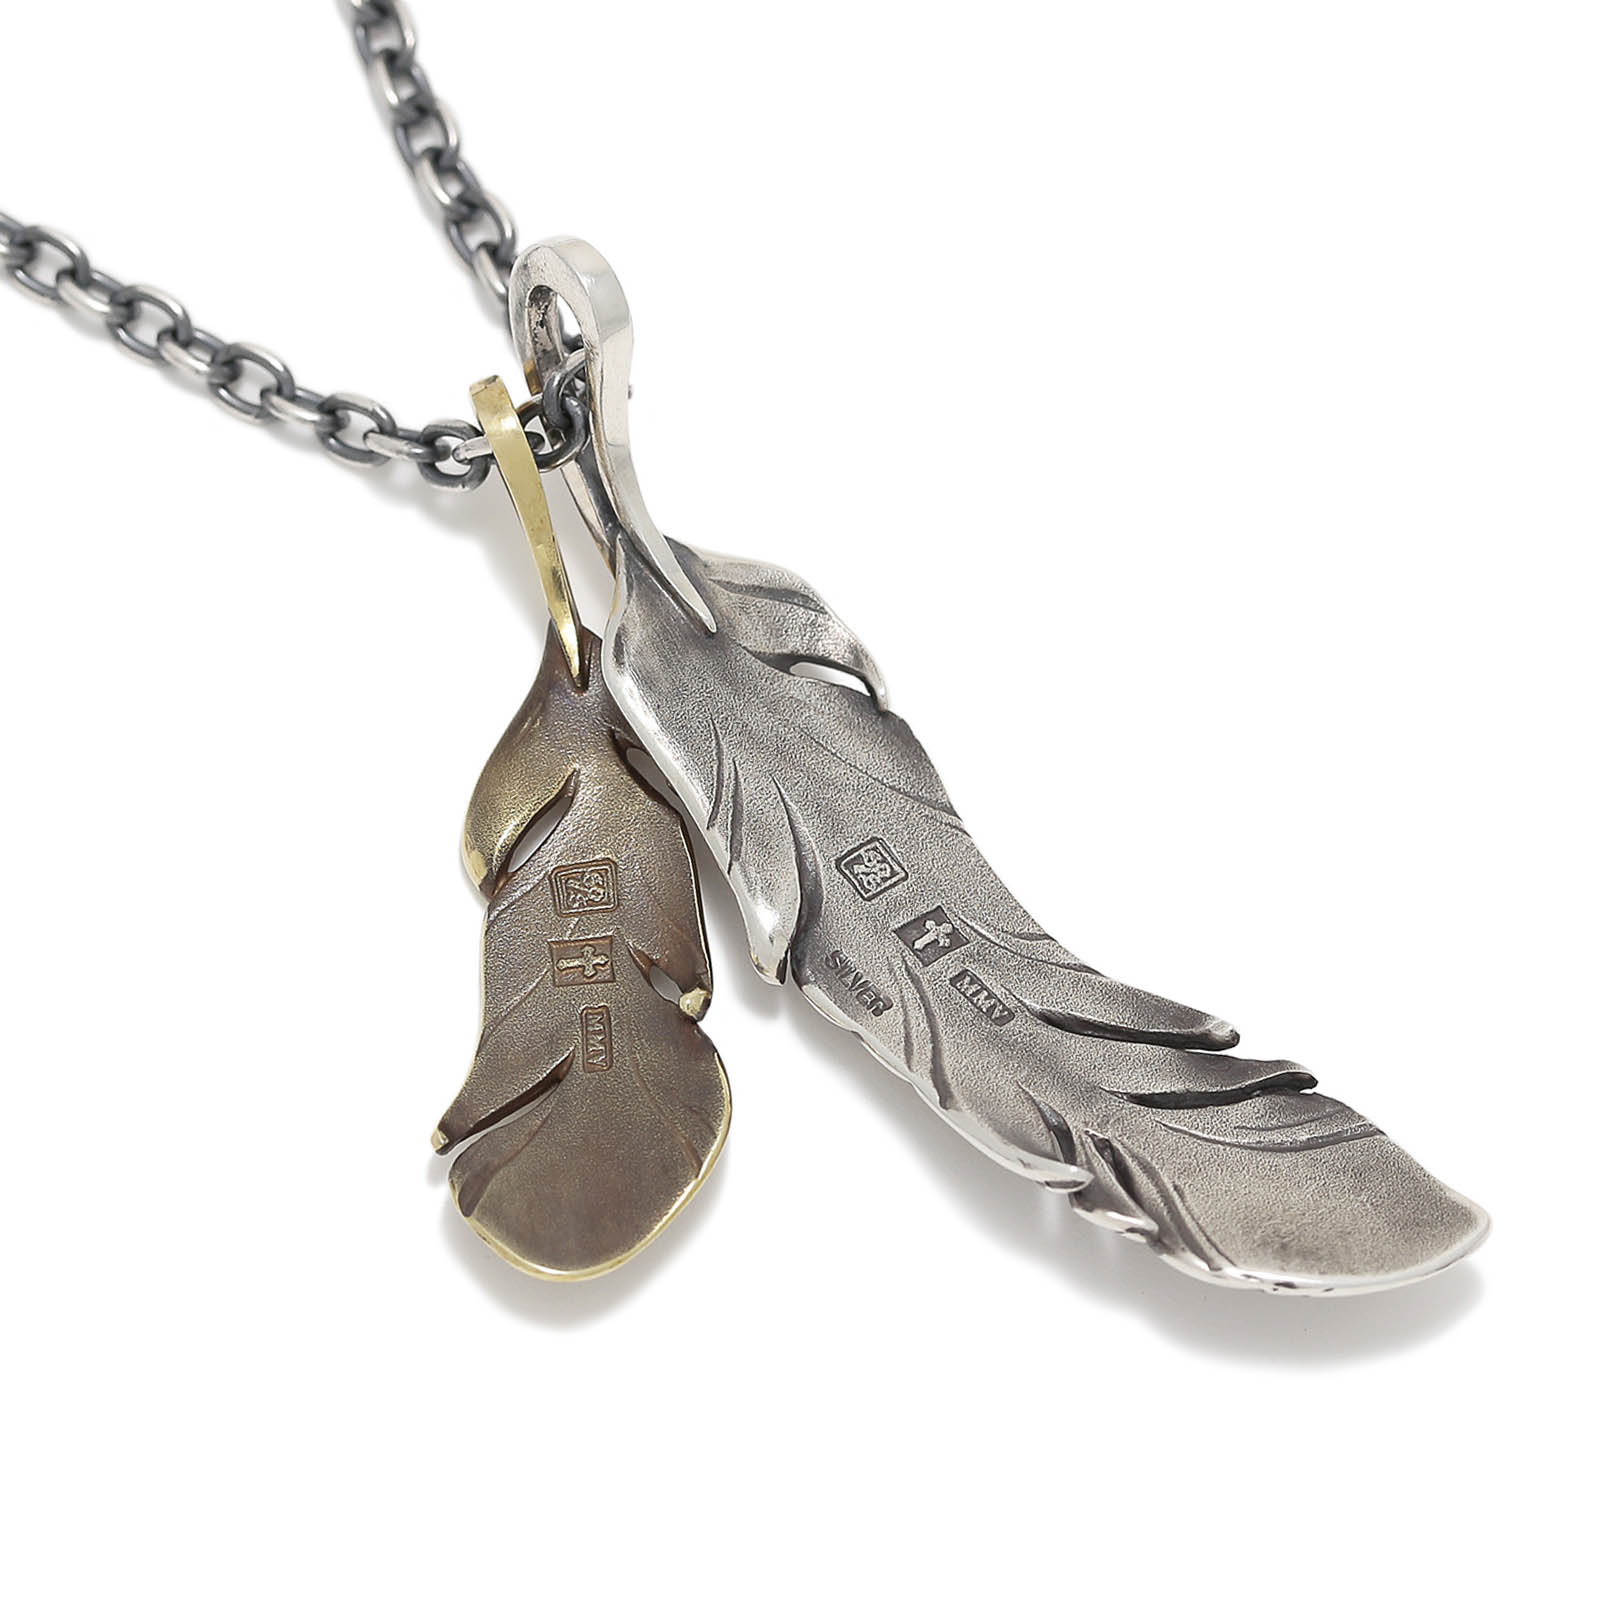 Old Feather Necklace（オールドフェザーネックレス） SYMPATHY OF SOUL（シンパシーオブソウル）